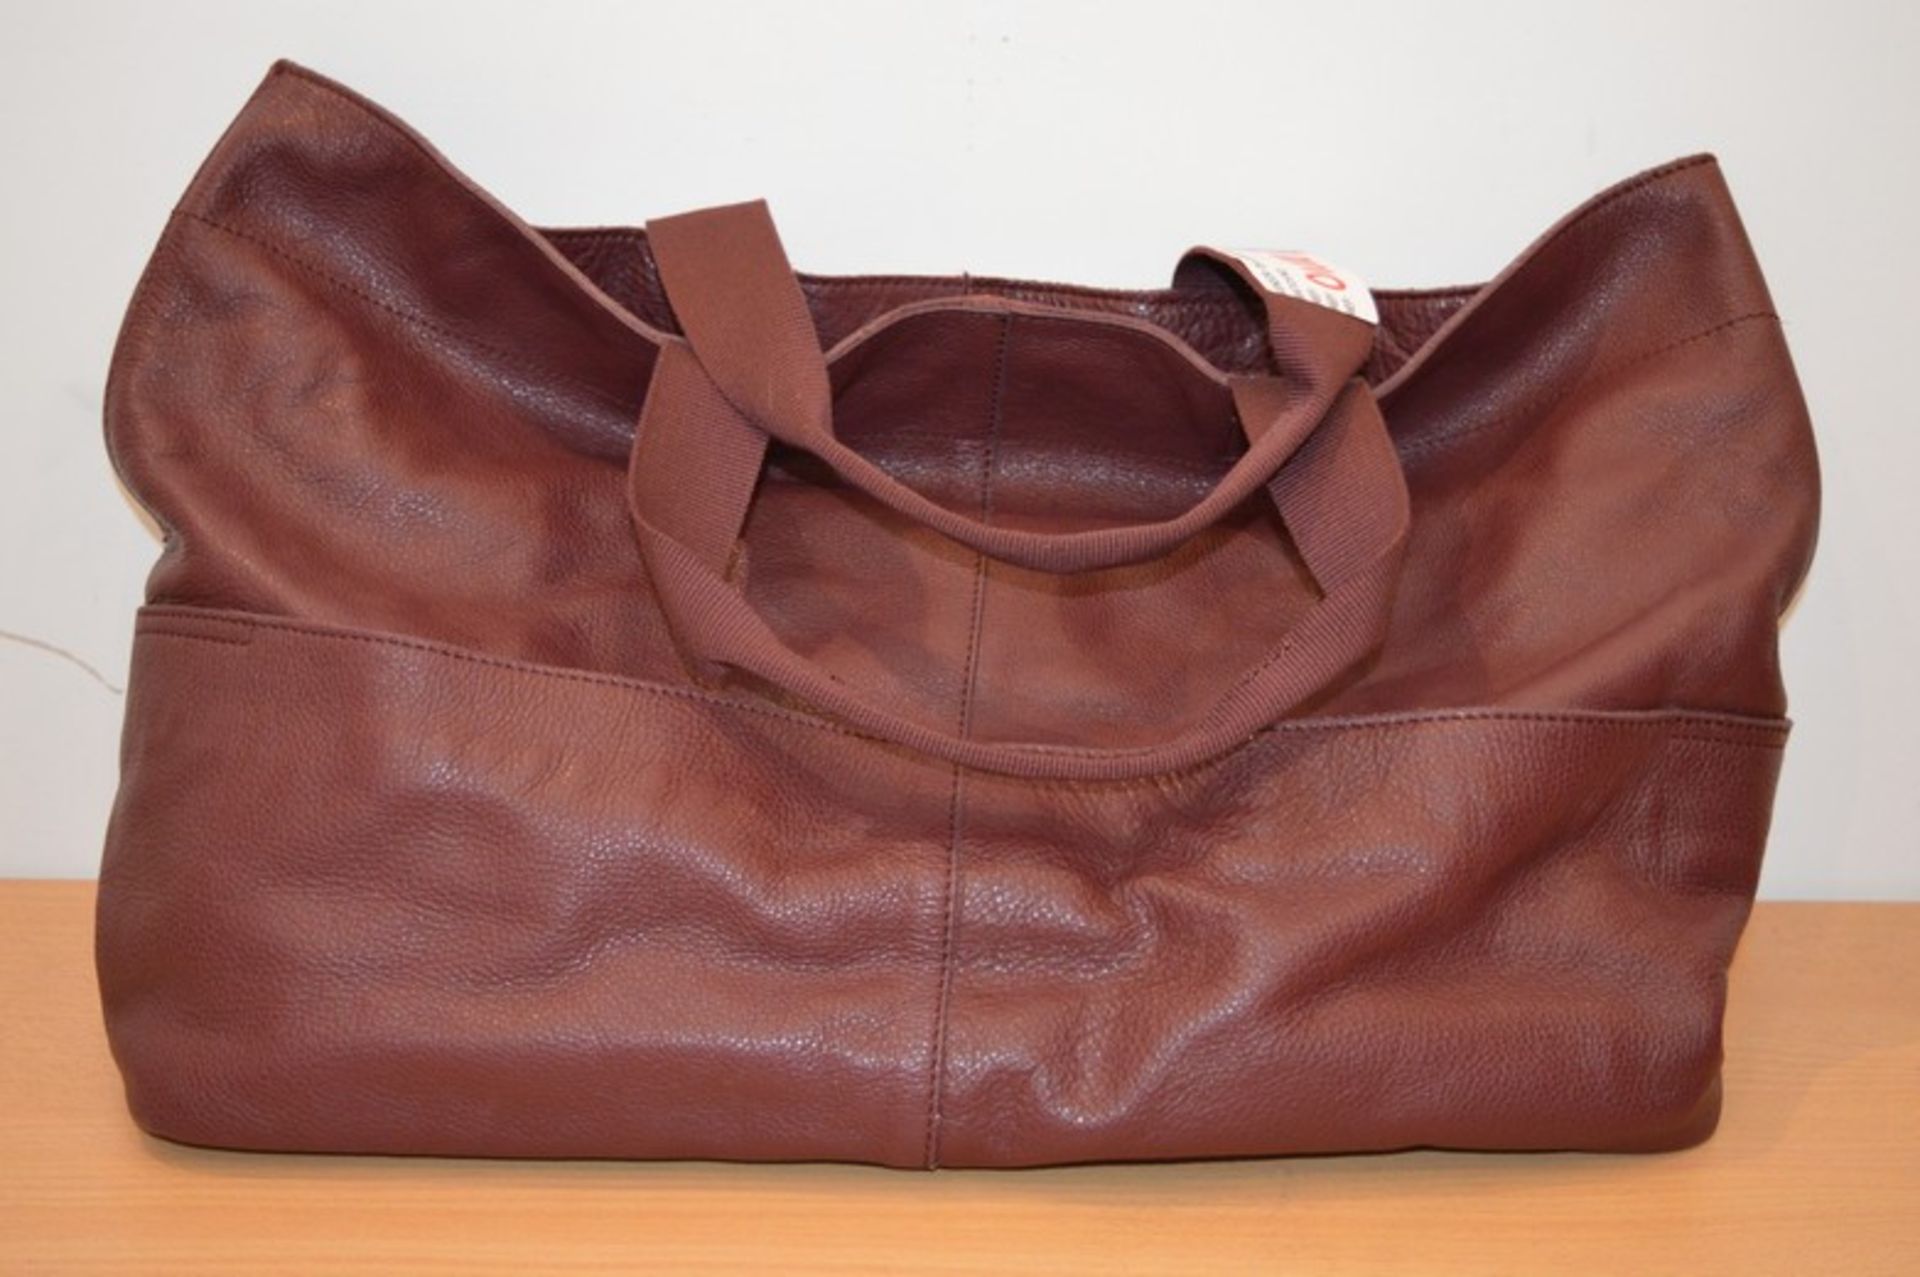 KIN BY JOHN LEWIS RED ROSE LEATHER LADIES LARGE BAG RRP £100(DSCLIP)(23.03.15)